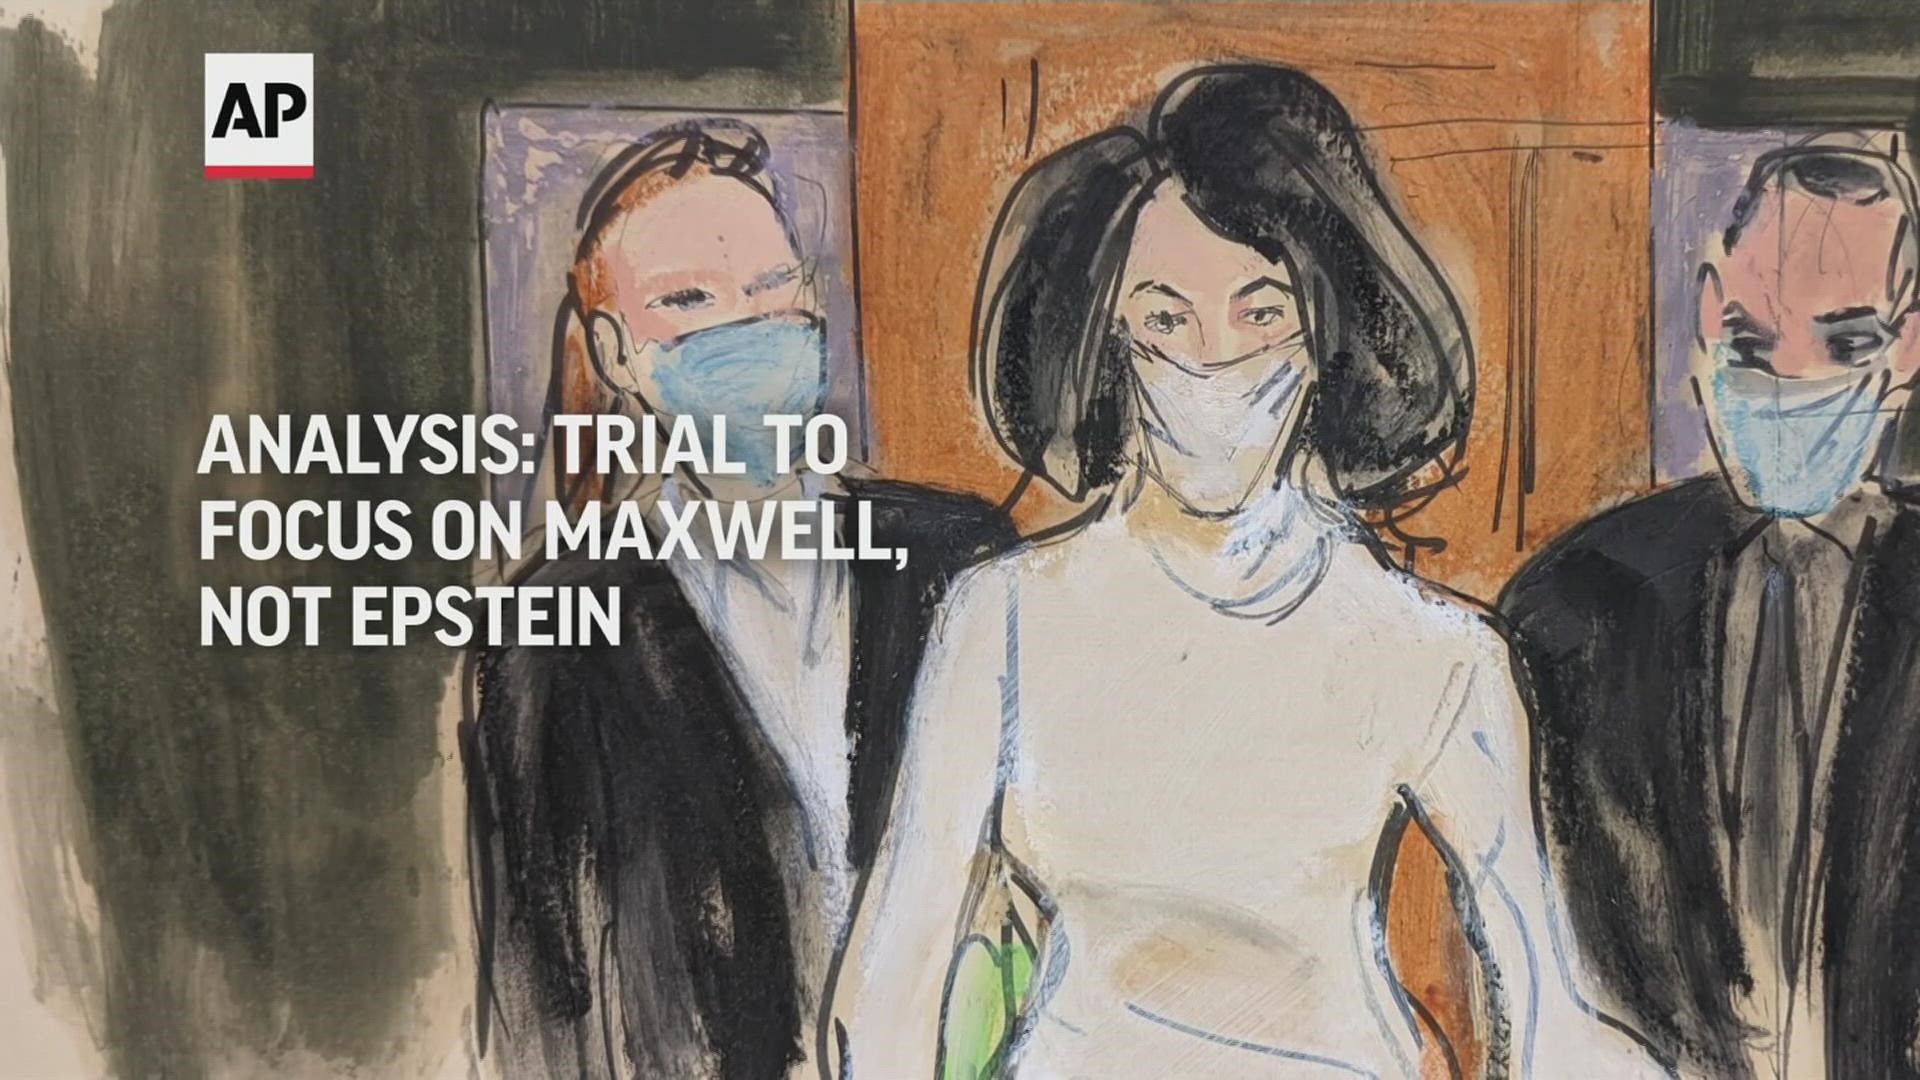 Ghislaine Maxwell — who once dated Jeffrey Epstein — is accused of acting as his chief enabler, recruiting and grooming young girls for him to abuse.